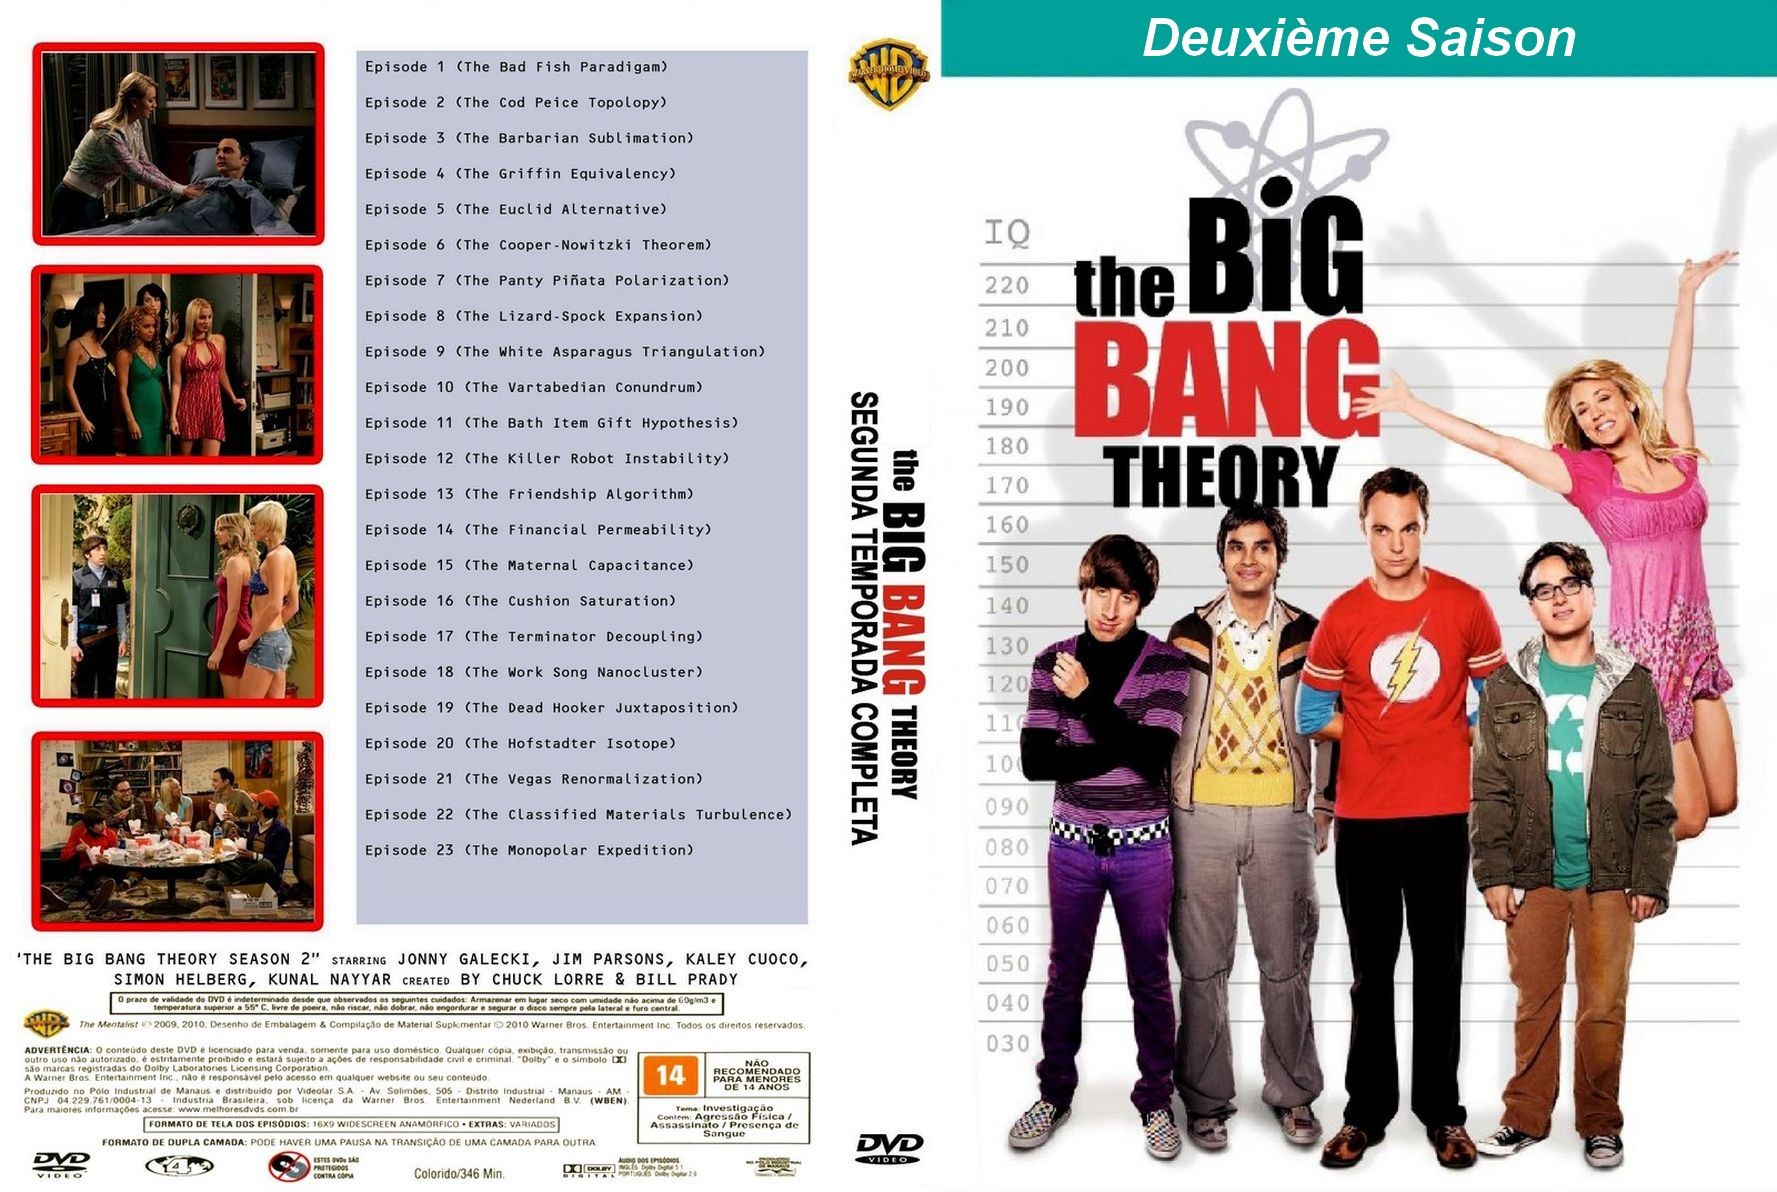 Jaquette DVD The Big Bang Theory Saison 2 Zone 1